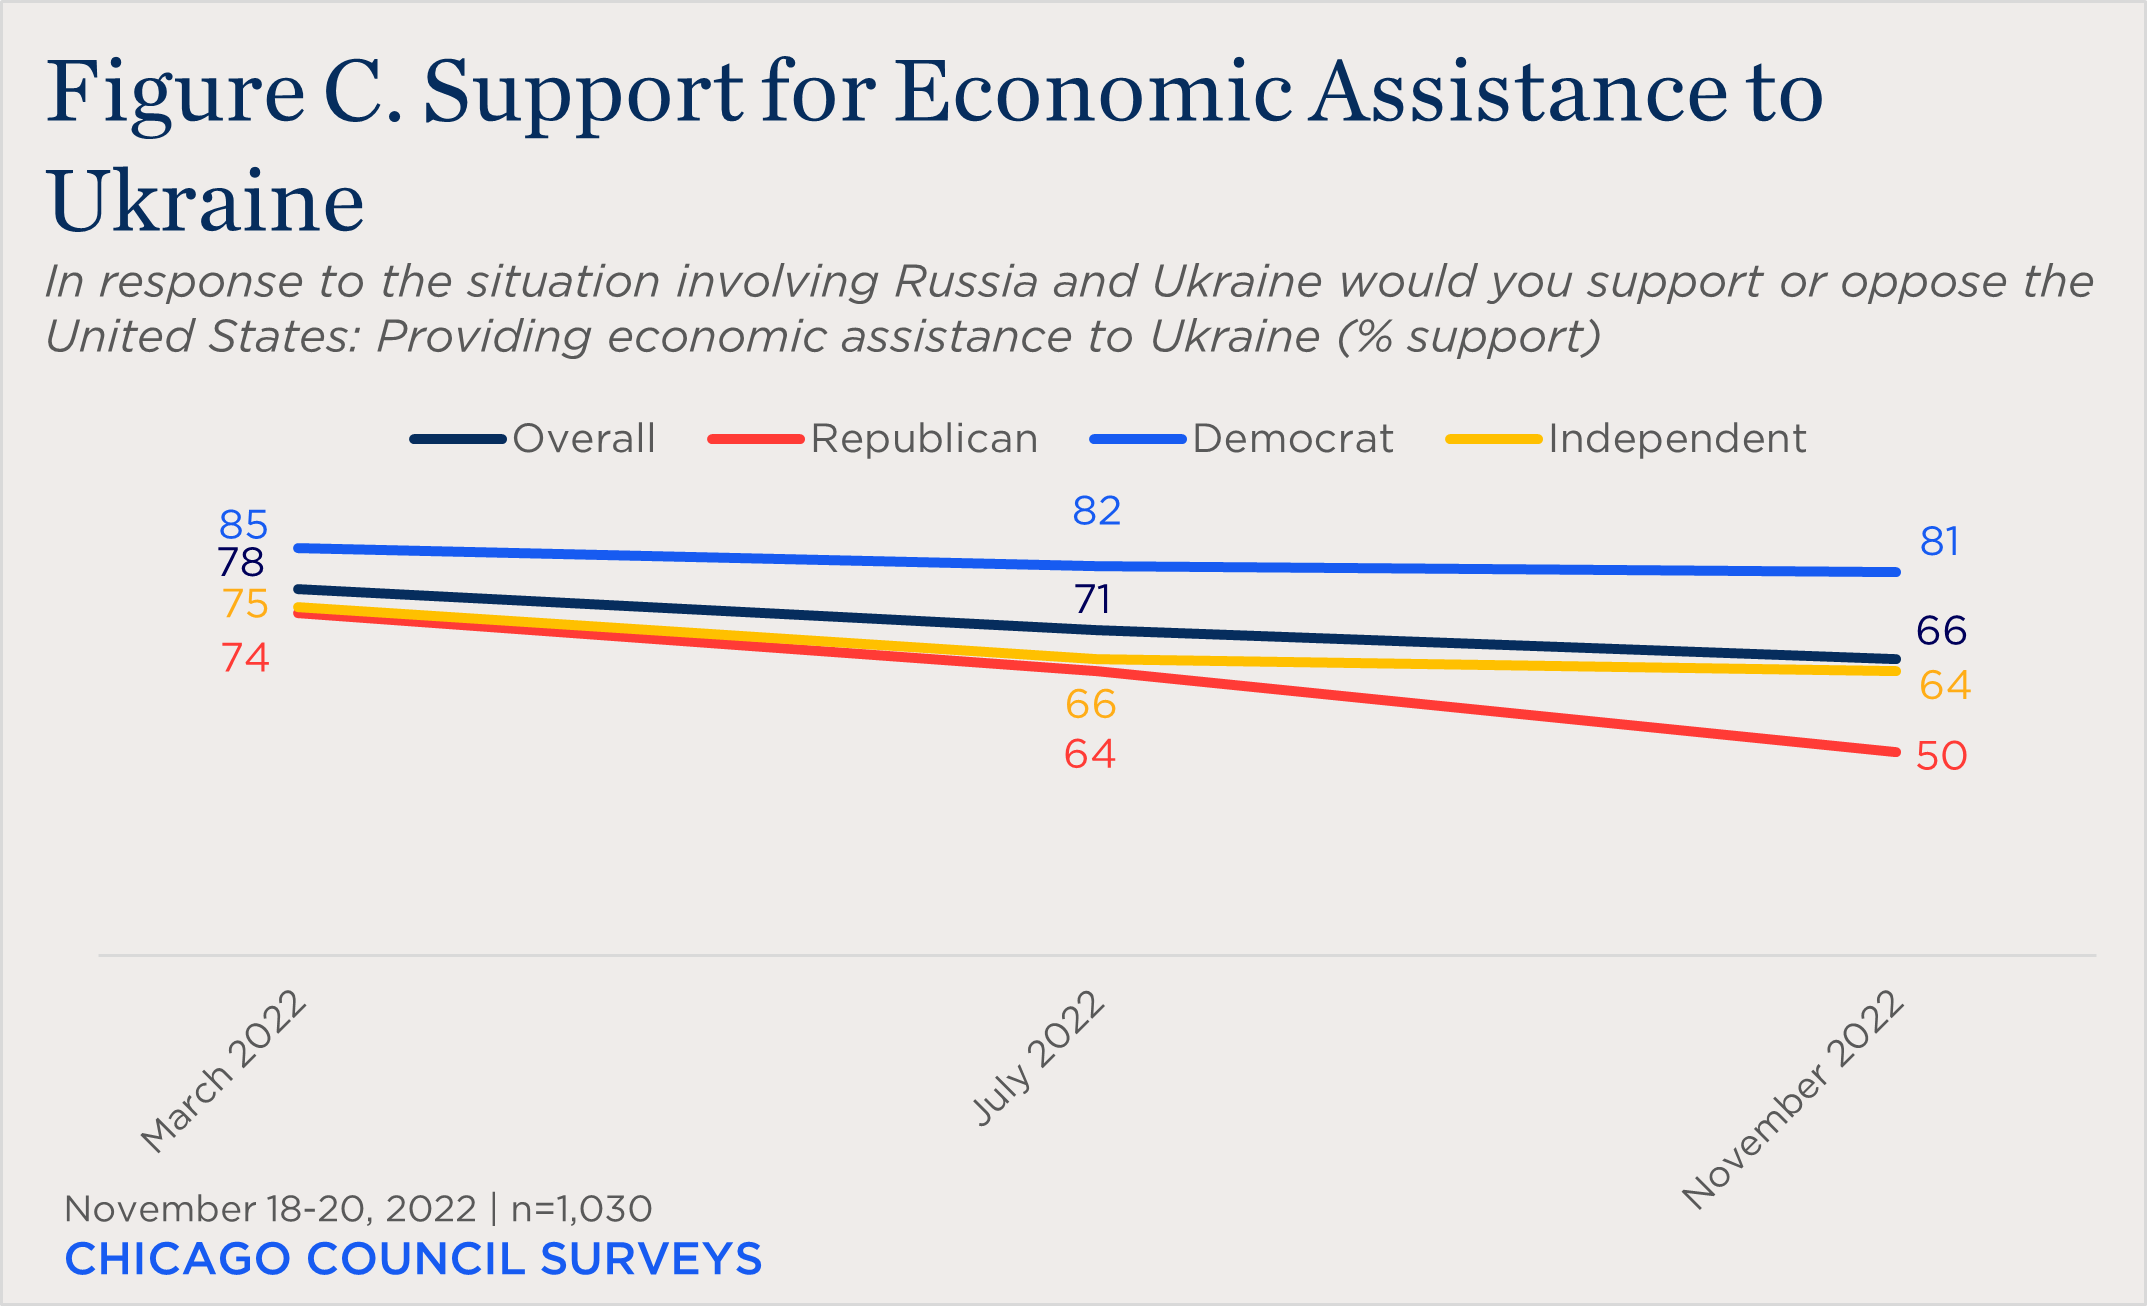 "bar chart showing partisan support for economic assistance to Ukraine"